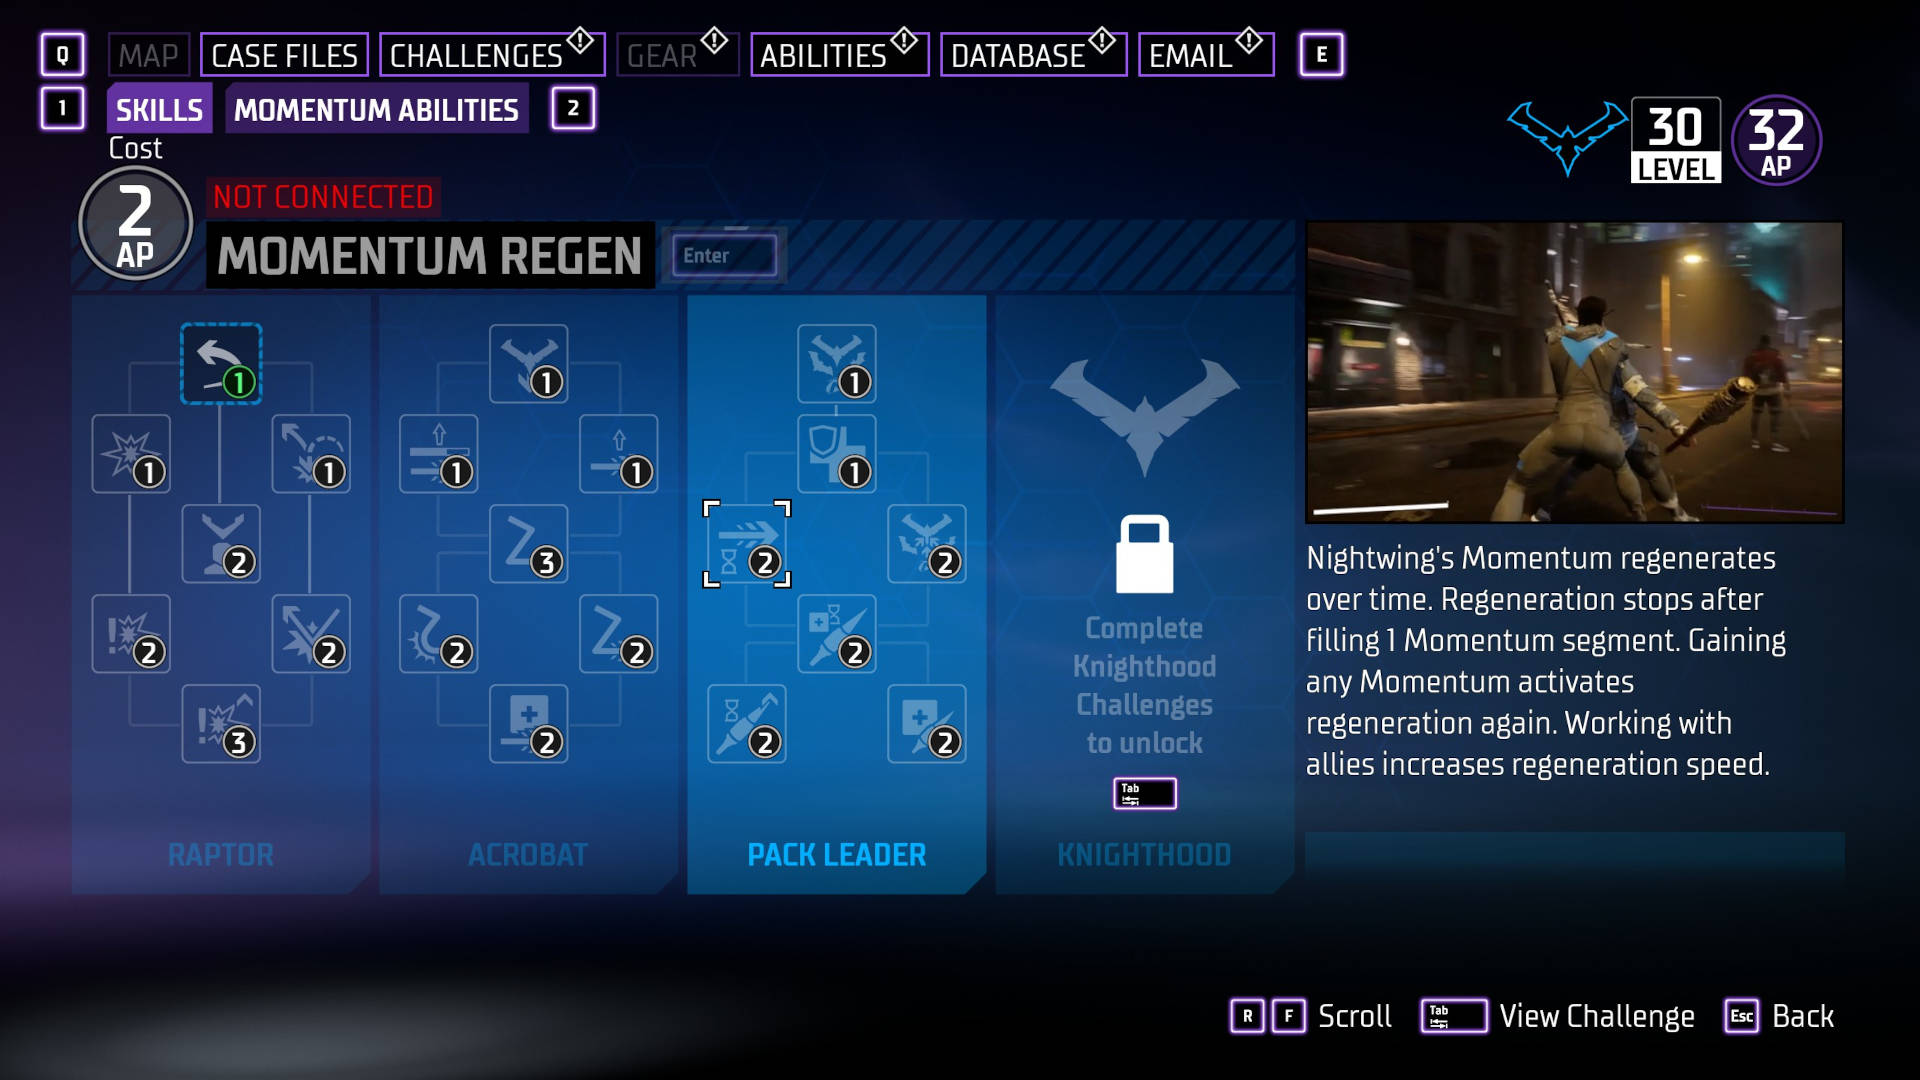 Gotham Knights abilities: Nightwing's ability tree. A window on the right side of the screen shows the Exploding Momentum Regen skill in action.